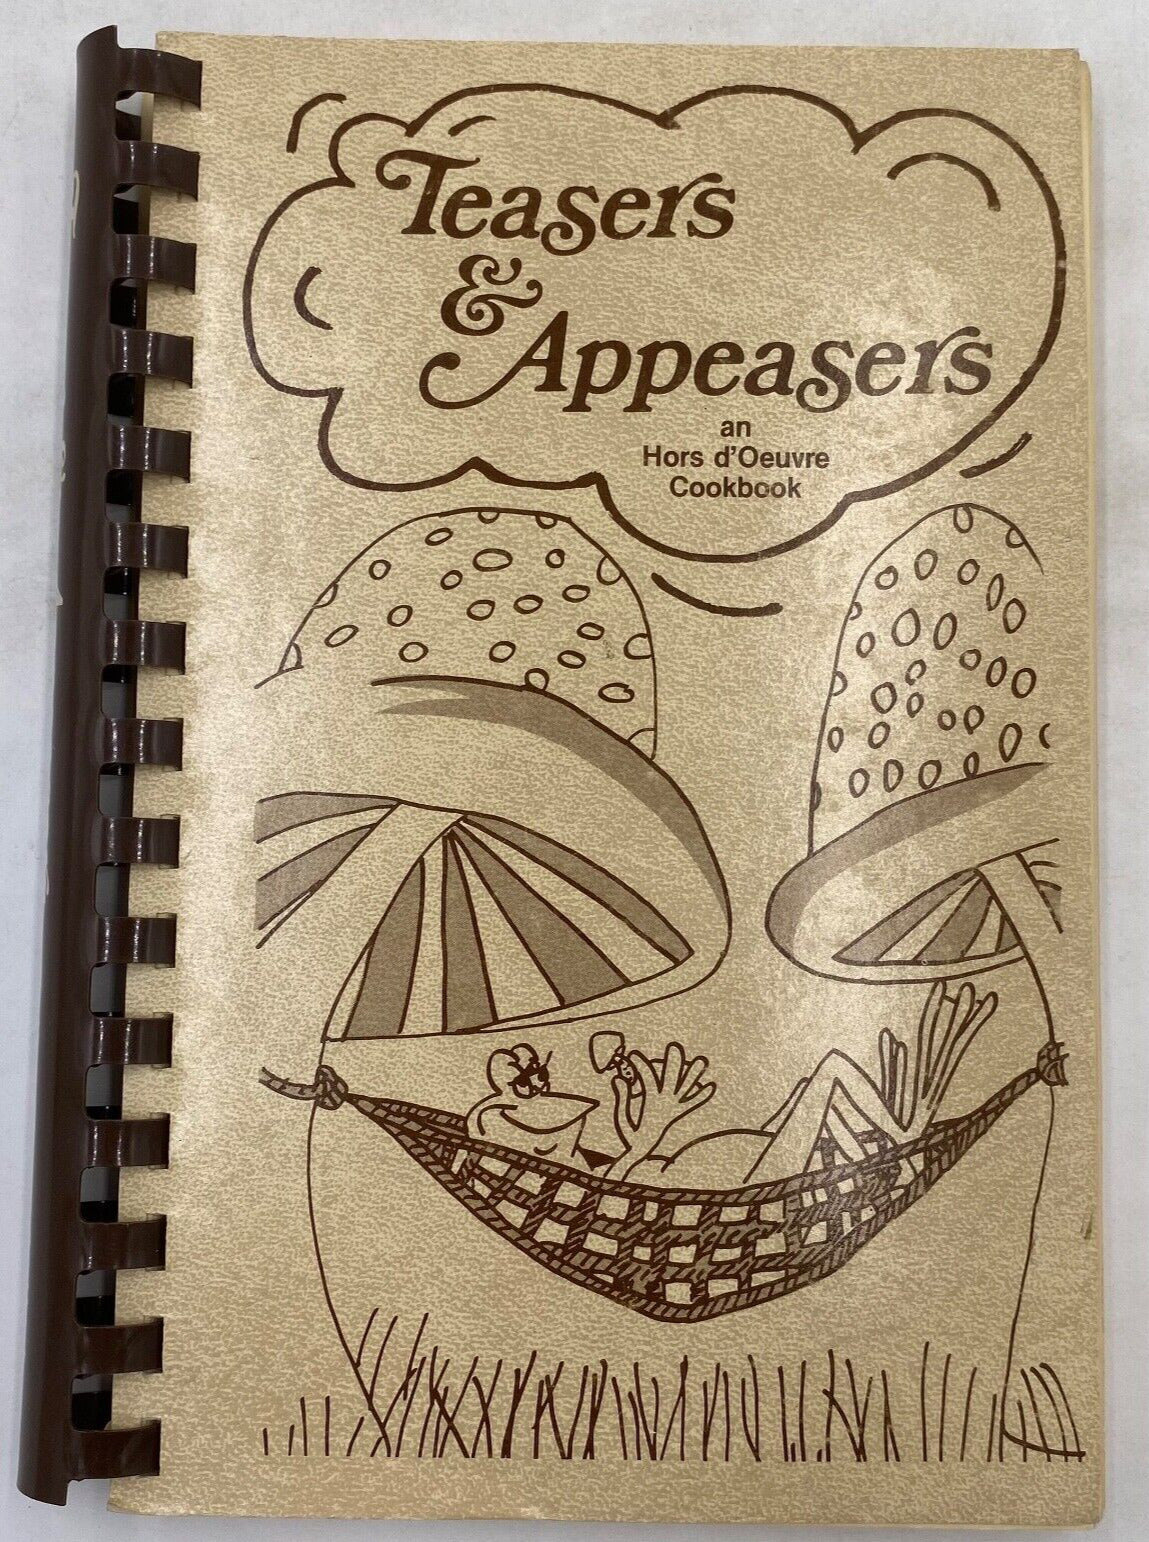 Teasers & Appeasers Hors d'Oeuvre Cookbook Grimes Richman 1981 3rd